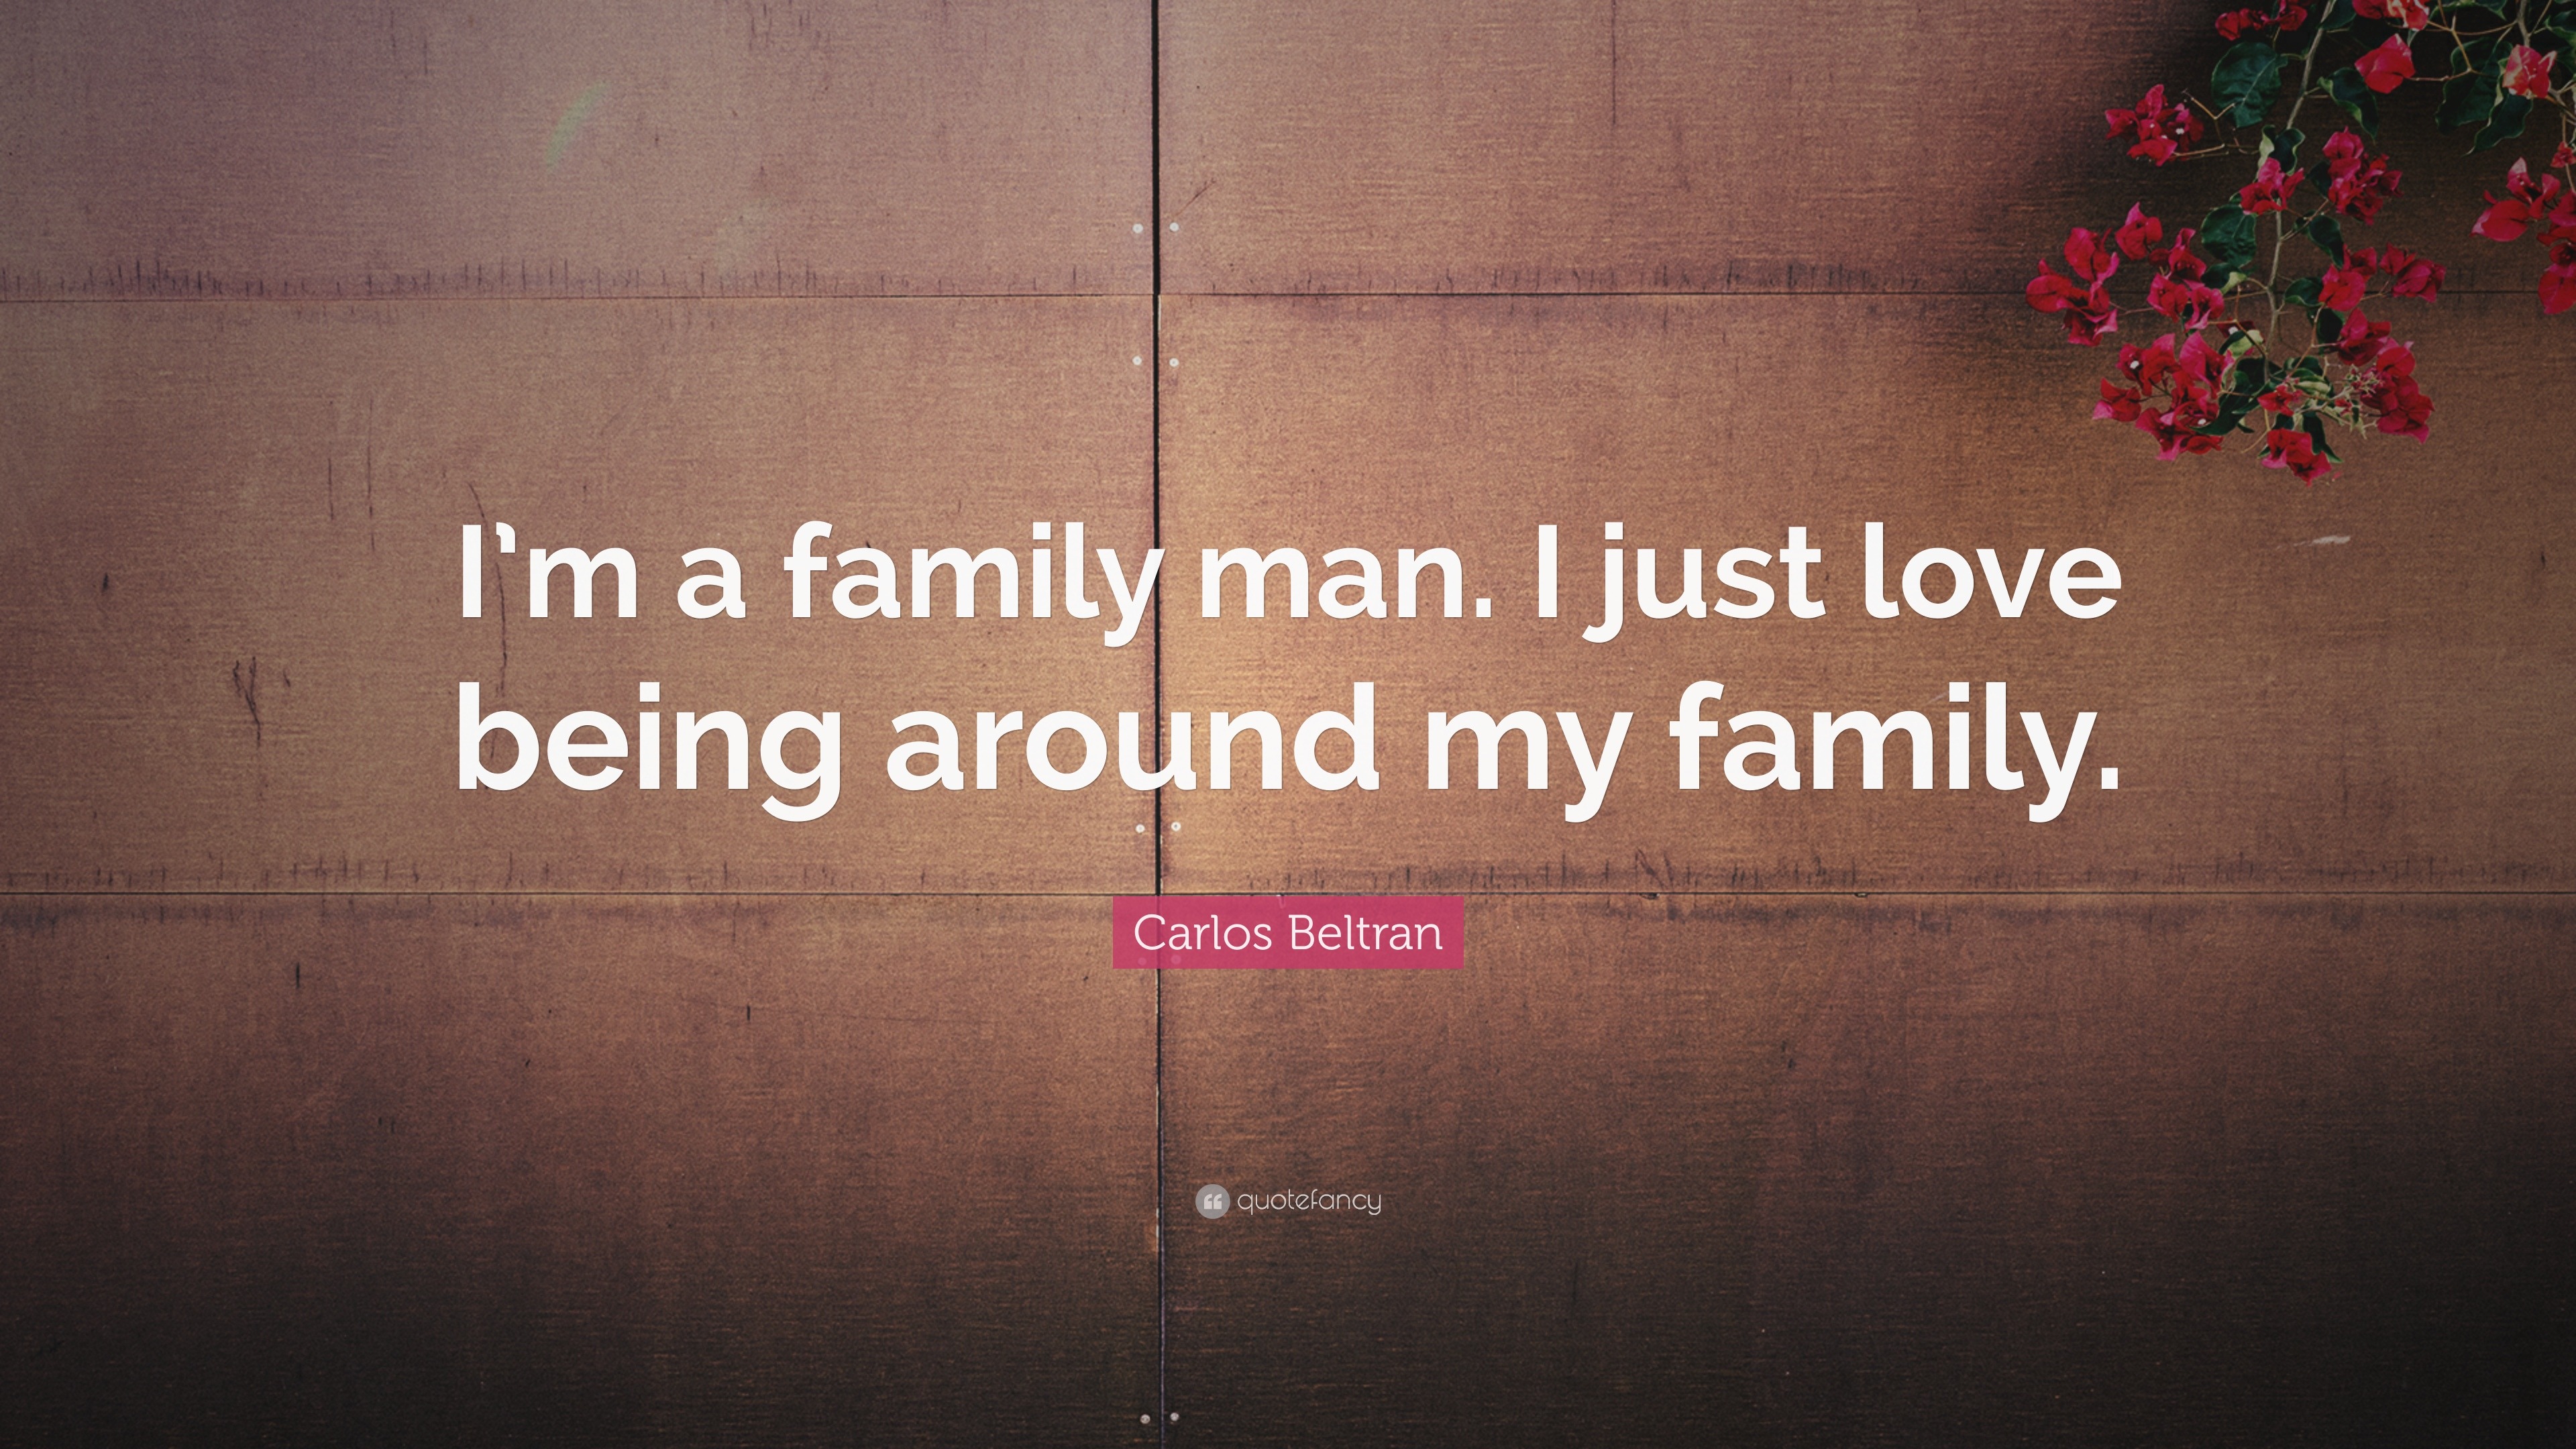 Carlos Beltran Quote “I m a family man I just love being